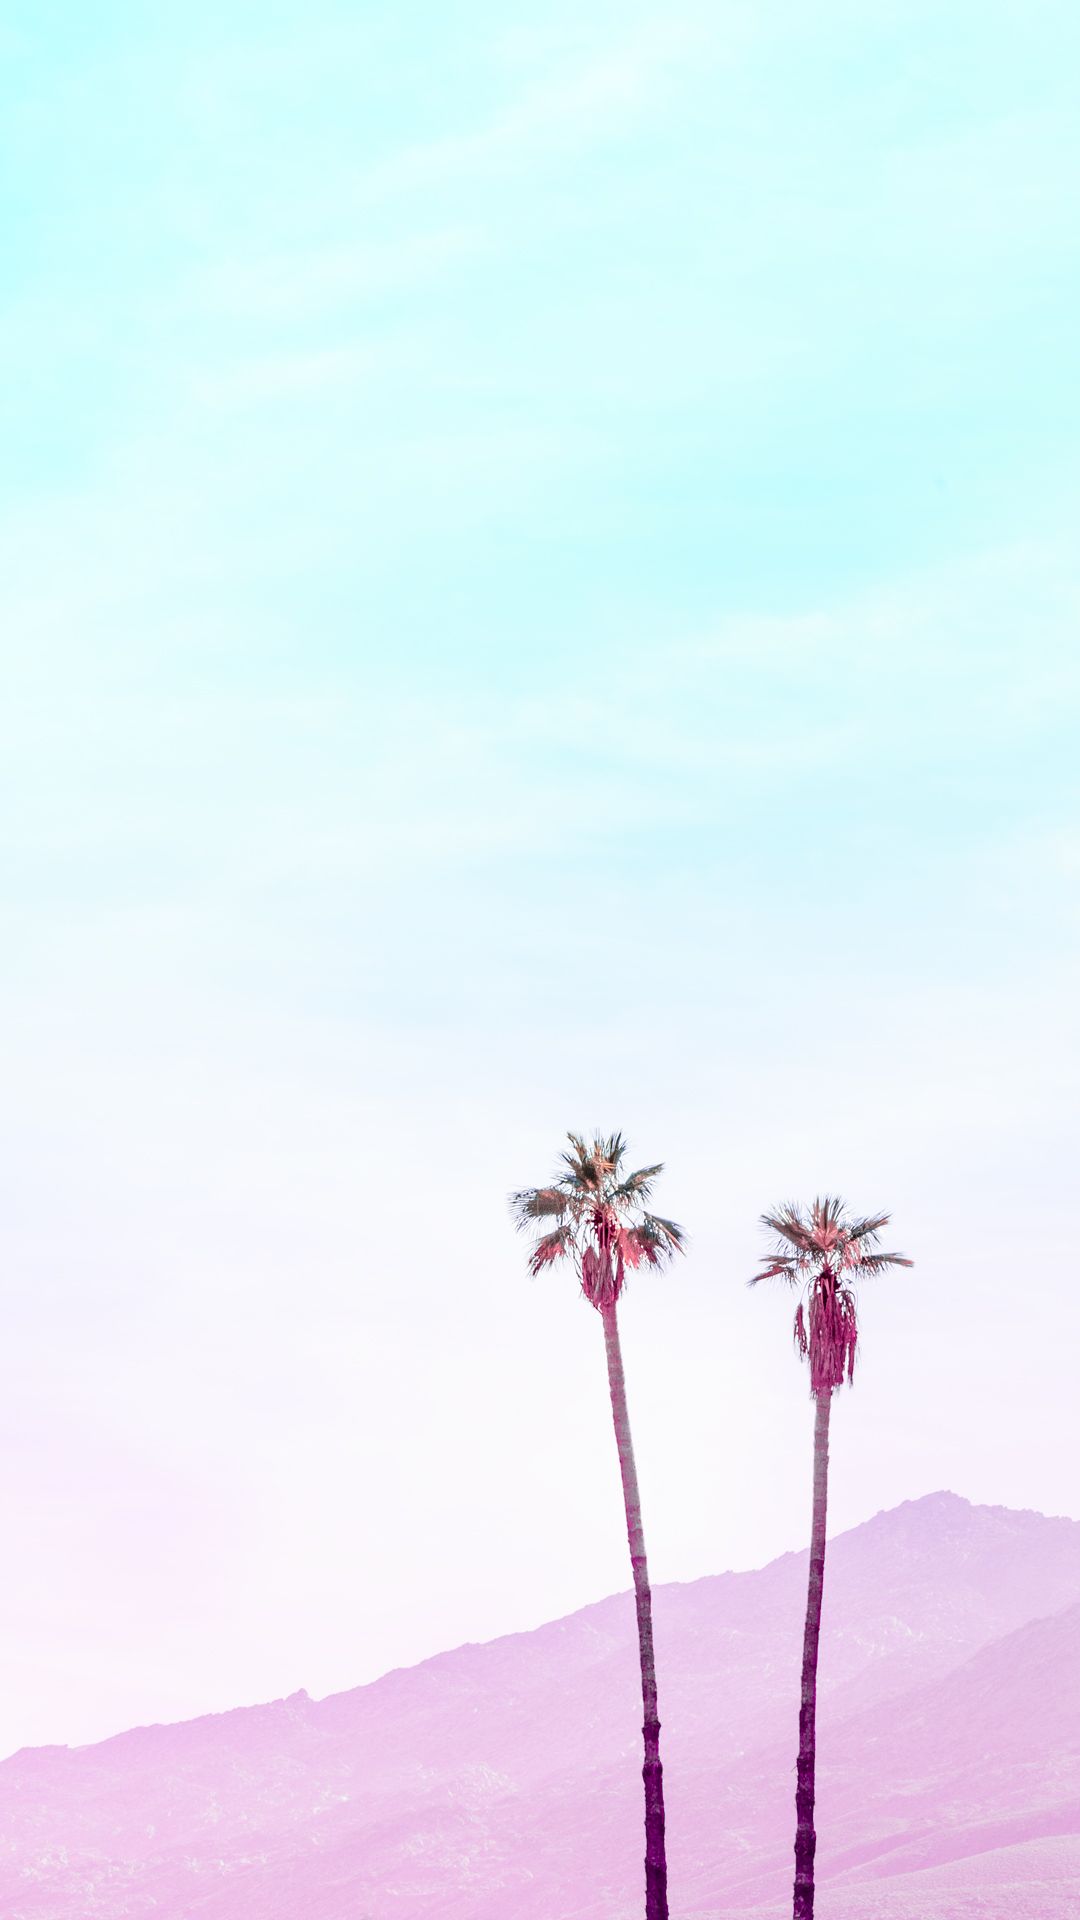 Pastel Sunset Iphone Wallpapers